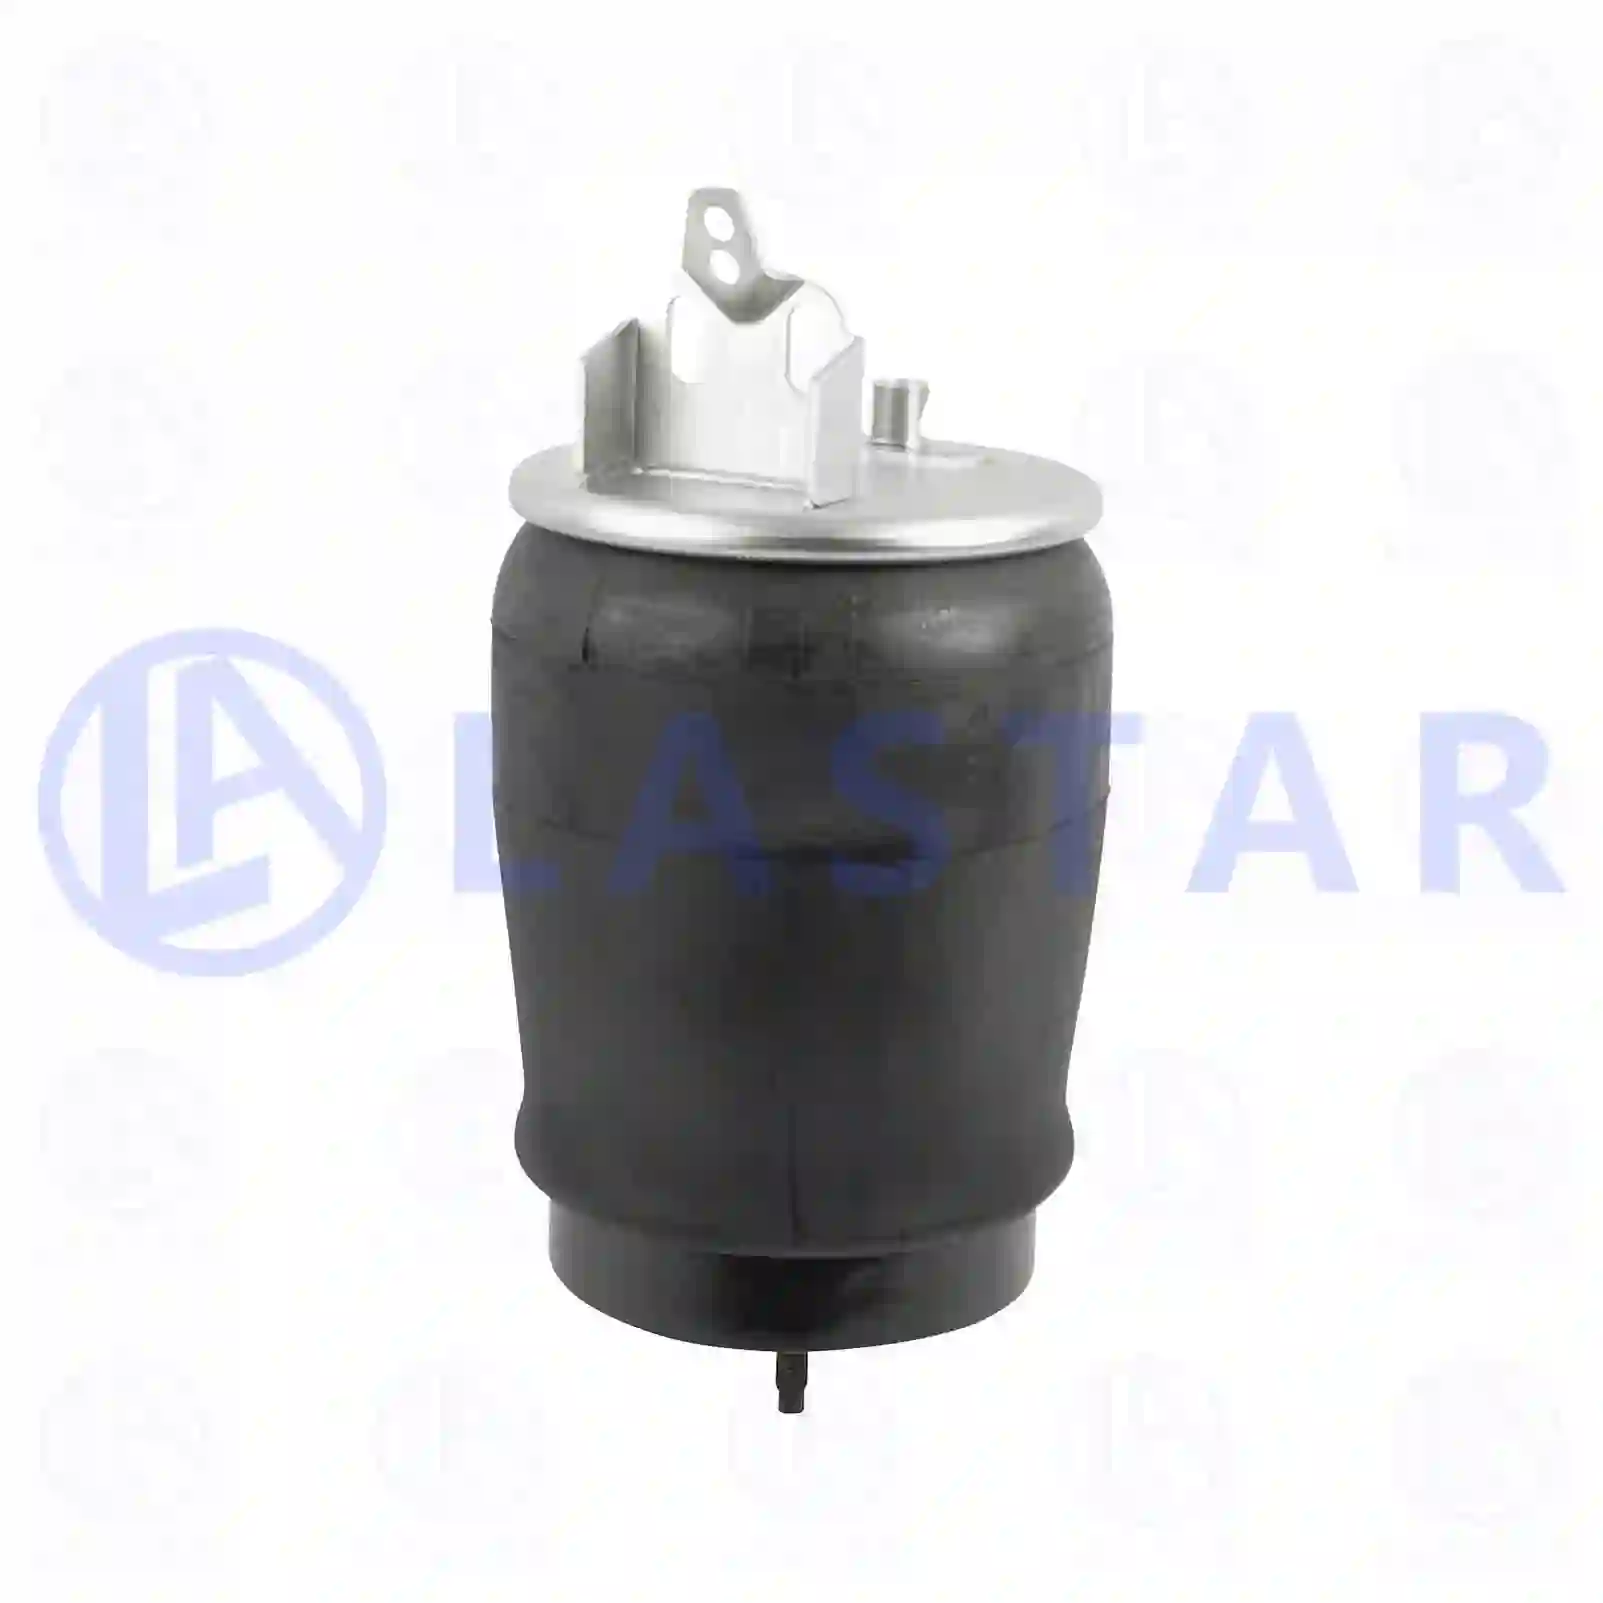 Air spring, with steel piston, 77729663, 20427802, 20456158, 20527732, 20531988, 20582212, , ||  77729663 Lastar Spare Part | Truck Spare Parts, Auotomotive Spare Parts Air spring, with steel piston, 77729663, 20427802, 20456158, 20527732, 20531988, 20582212, , ||  77729663 Lastar Spare Part | Truck Spare Parts, Auotomotive Spare Parts